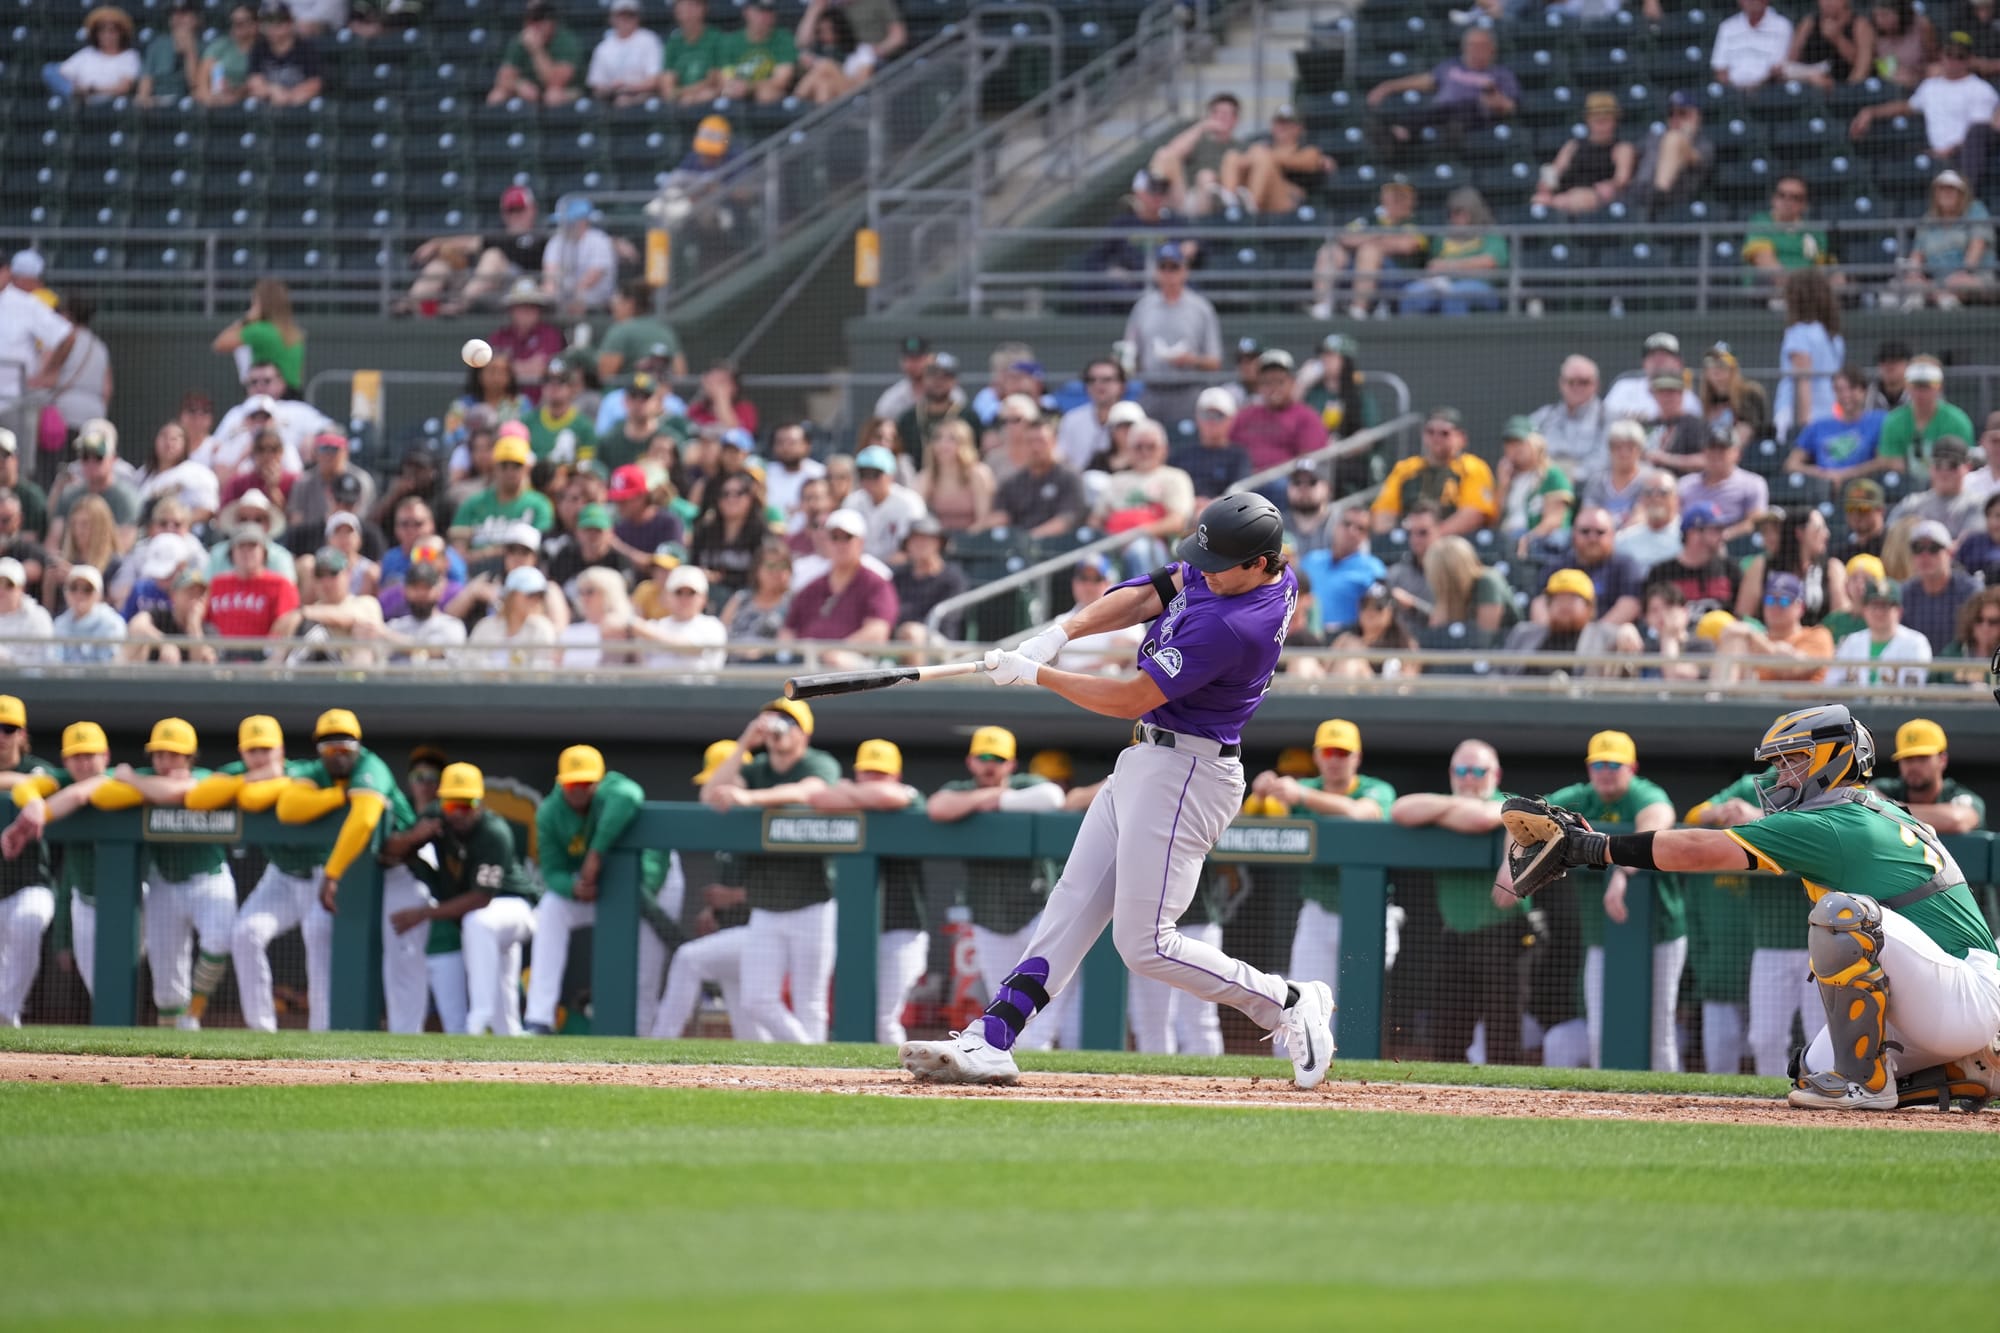 This photo shows Michael Toglia swinging from the left side of the plate. He’s wearing a purple jersey. 